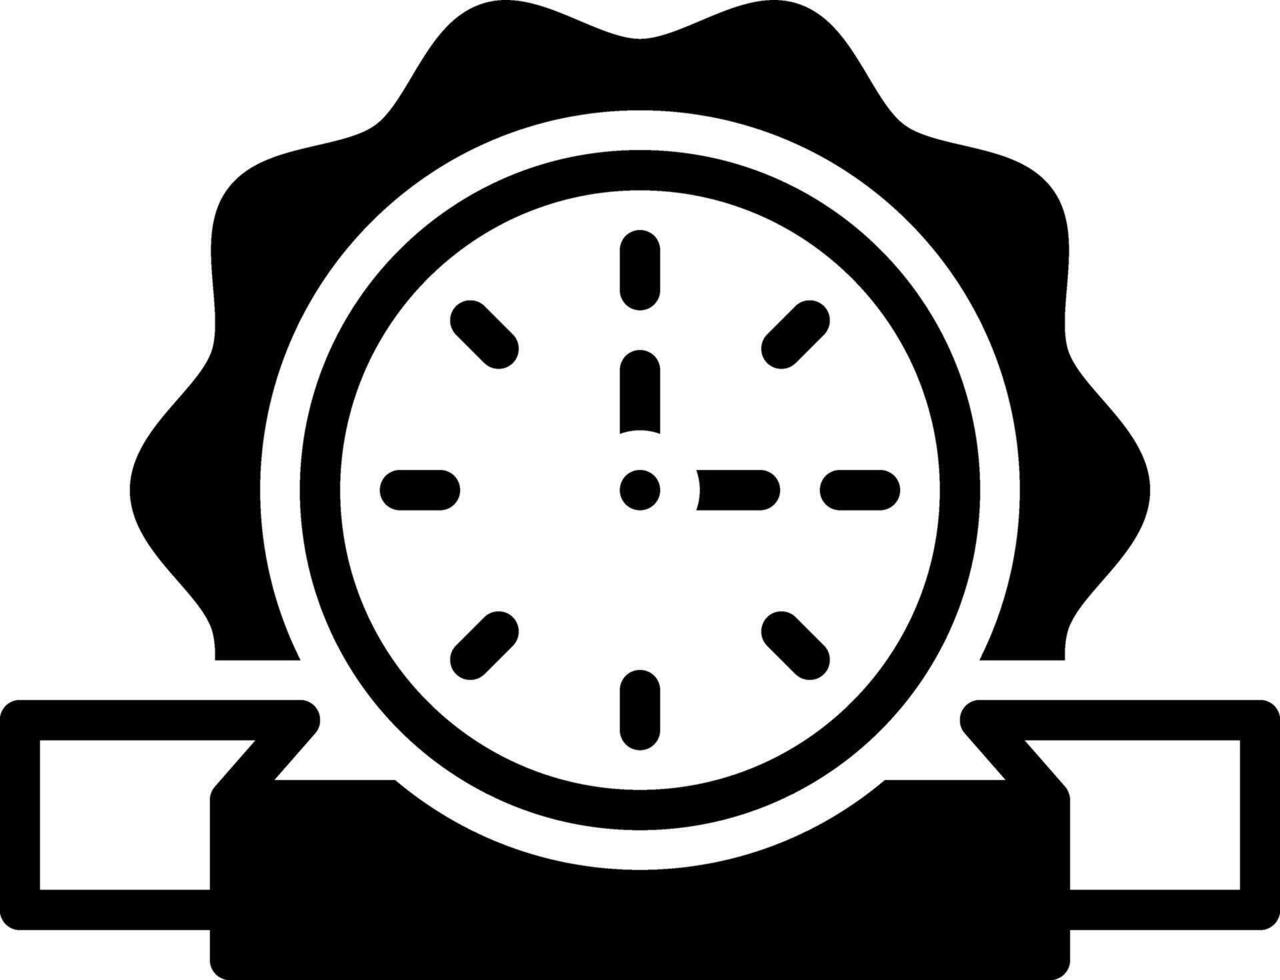 Solid black icon for limited vector